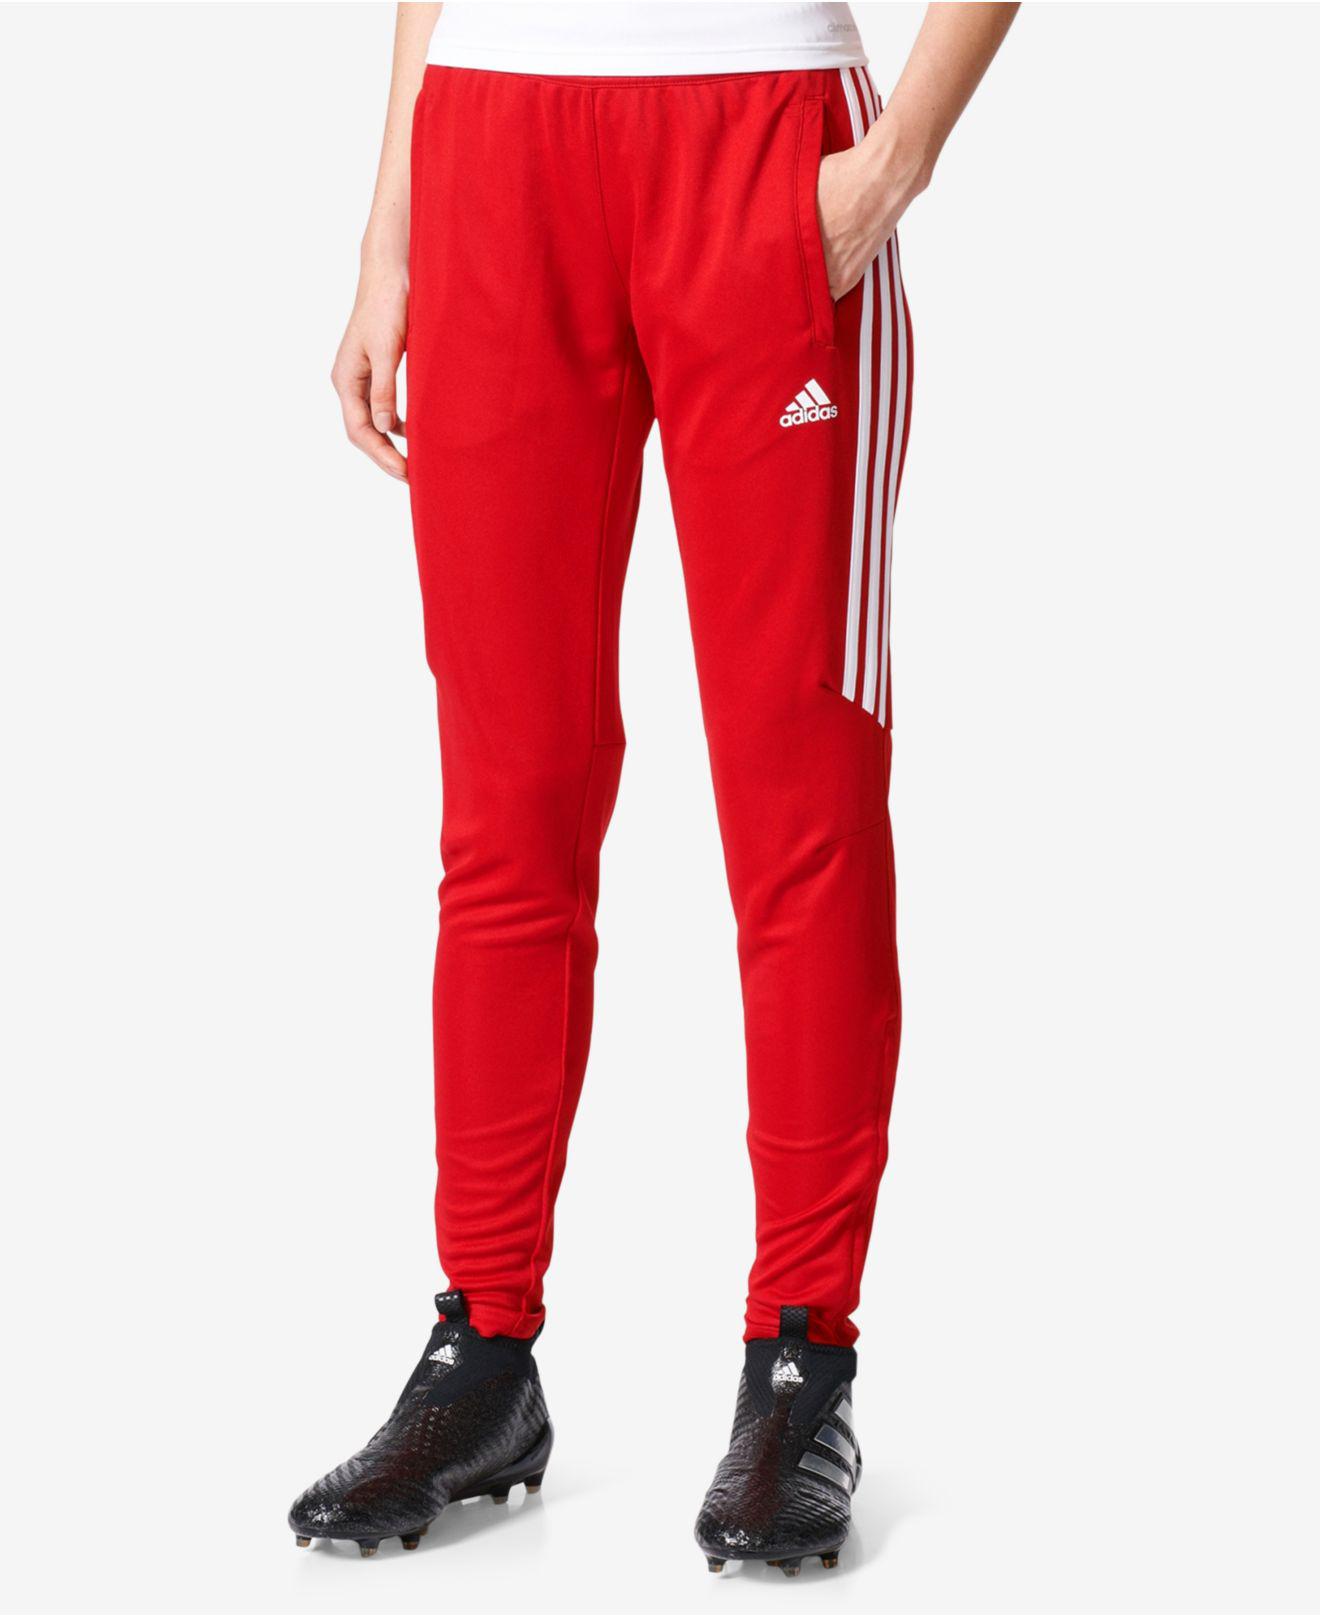 Red Adidas Climacool Pants Britain, SAVE 42% - mpgc.net